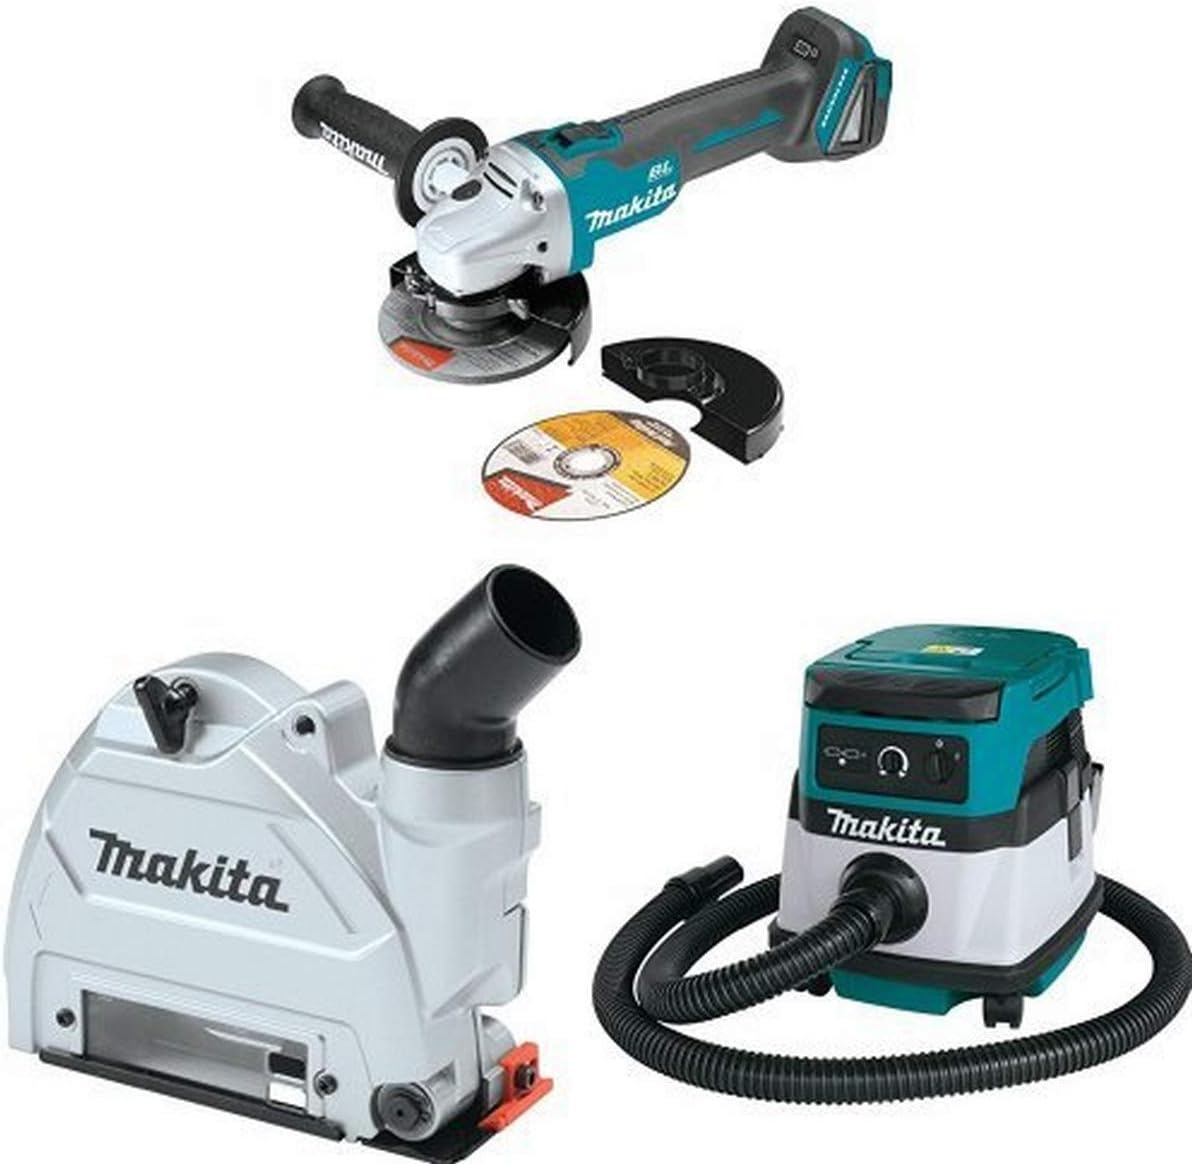 Makita XAG04Z 18V LXT Brushless 4-1/2-Inch - 5-Inch Cut-Off/Angle Grinder, 196846-1 Dust Extraction Tuck Point Guard,  XCV04Z 18V X2 LXT (36V) 2.1 Gallon HEPA Filter Dry Dust Extractor/Vacuum